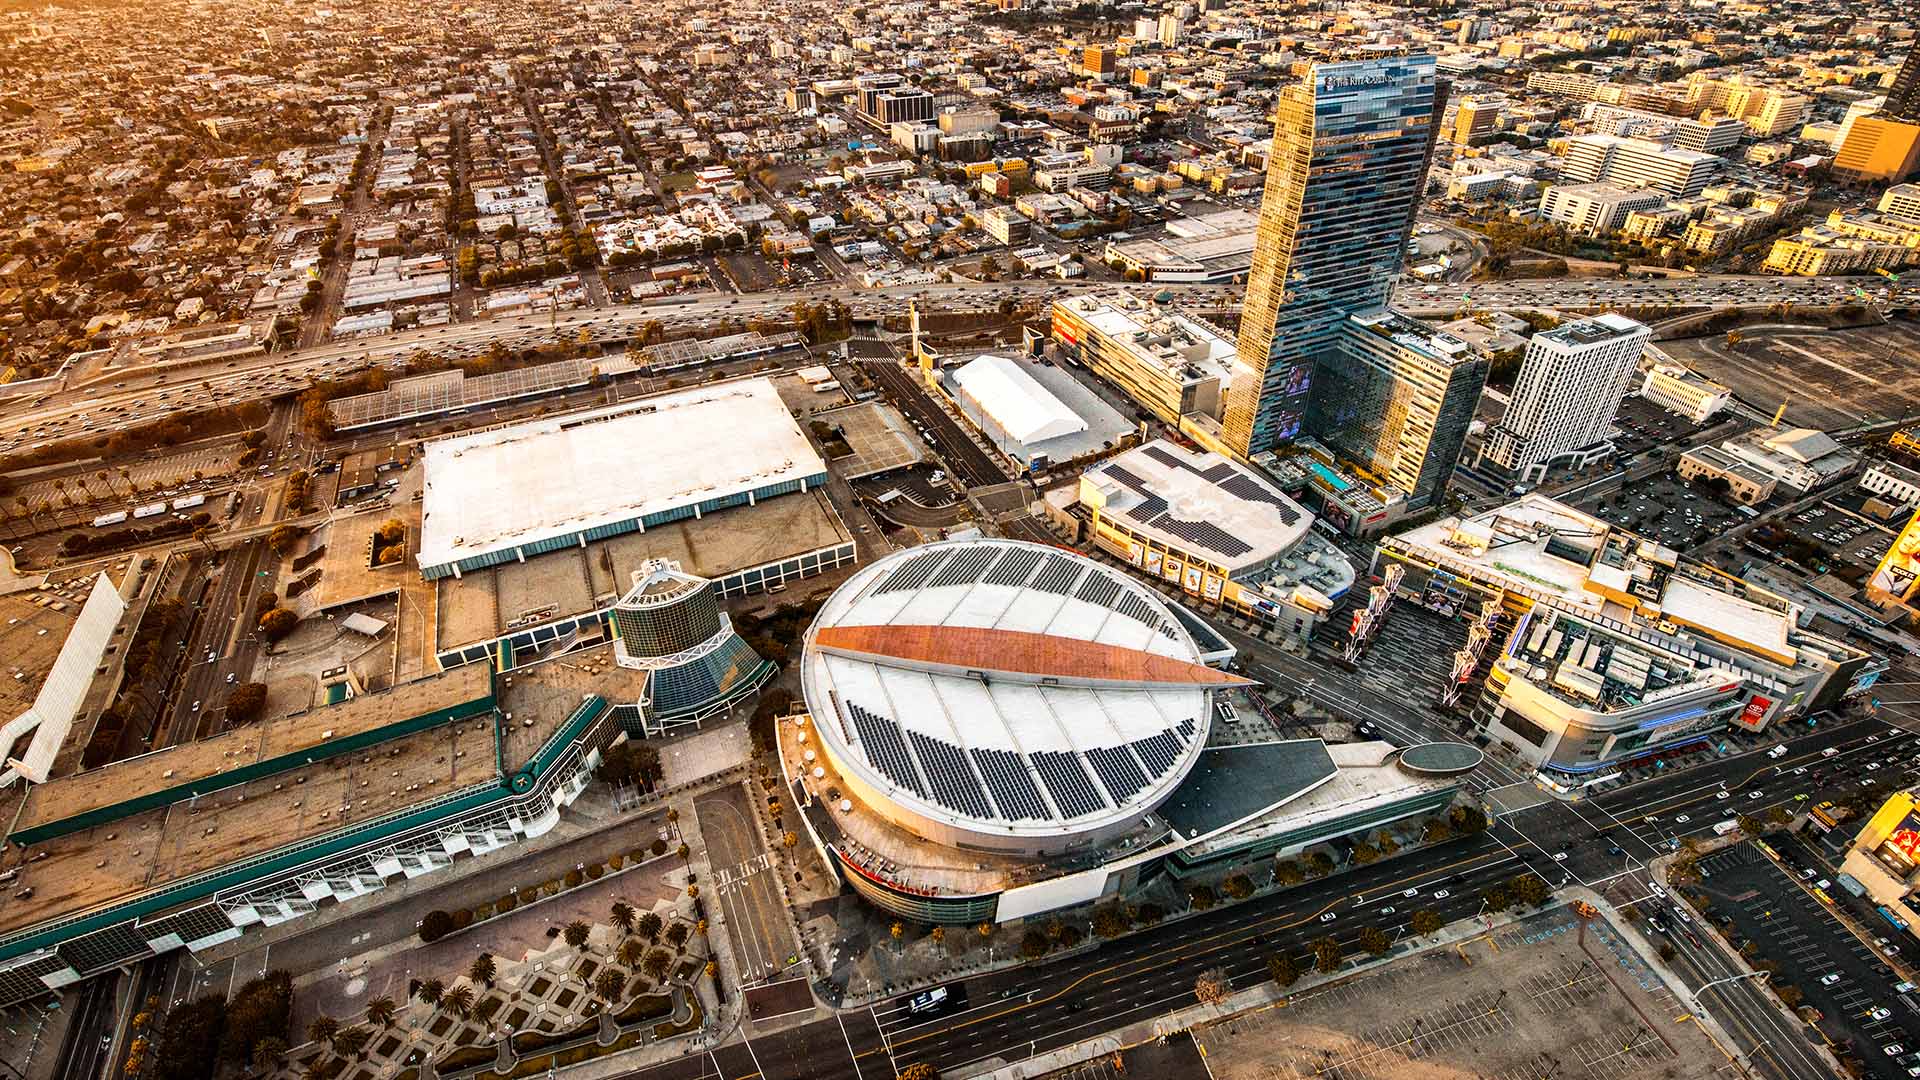 Aerial view of the staples center in warm light